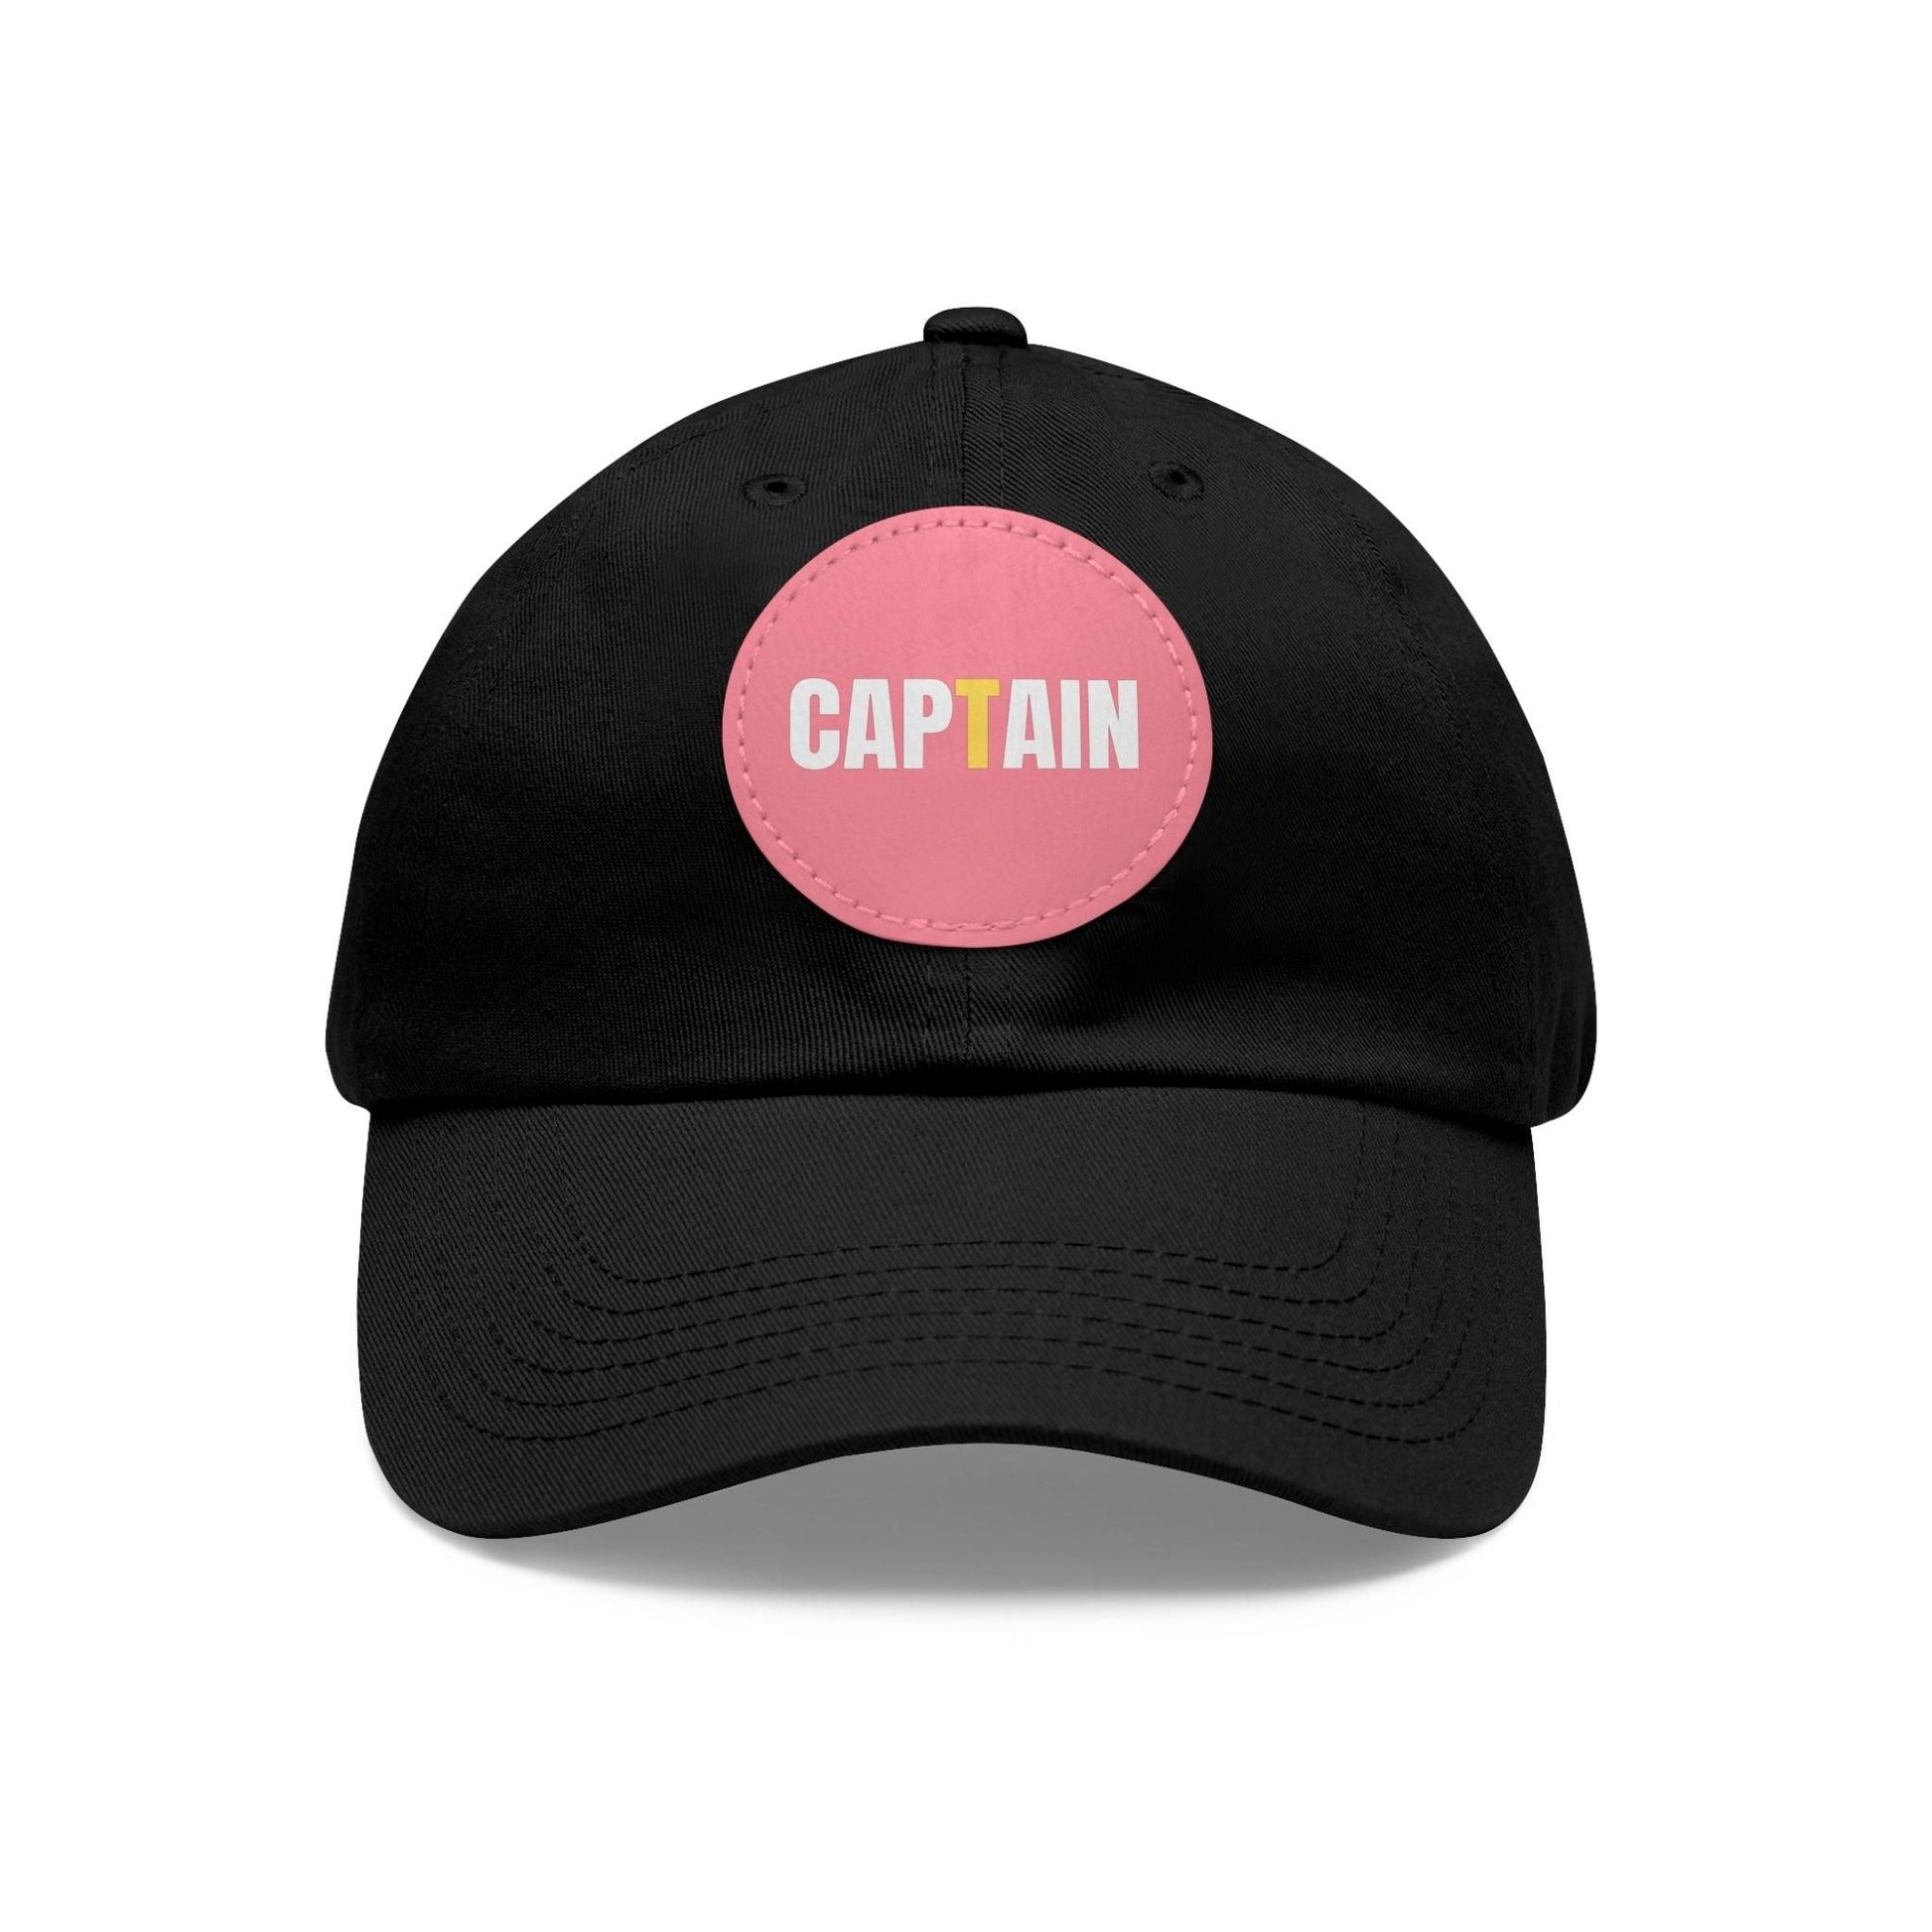 Captain Baseball Hat with Leather Patch Cap Black / Pink patch Circle One size